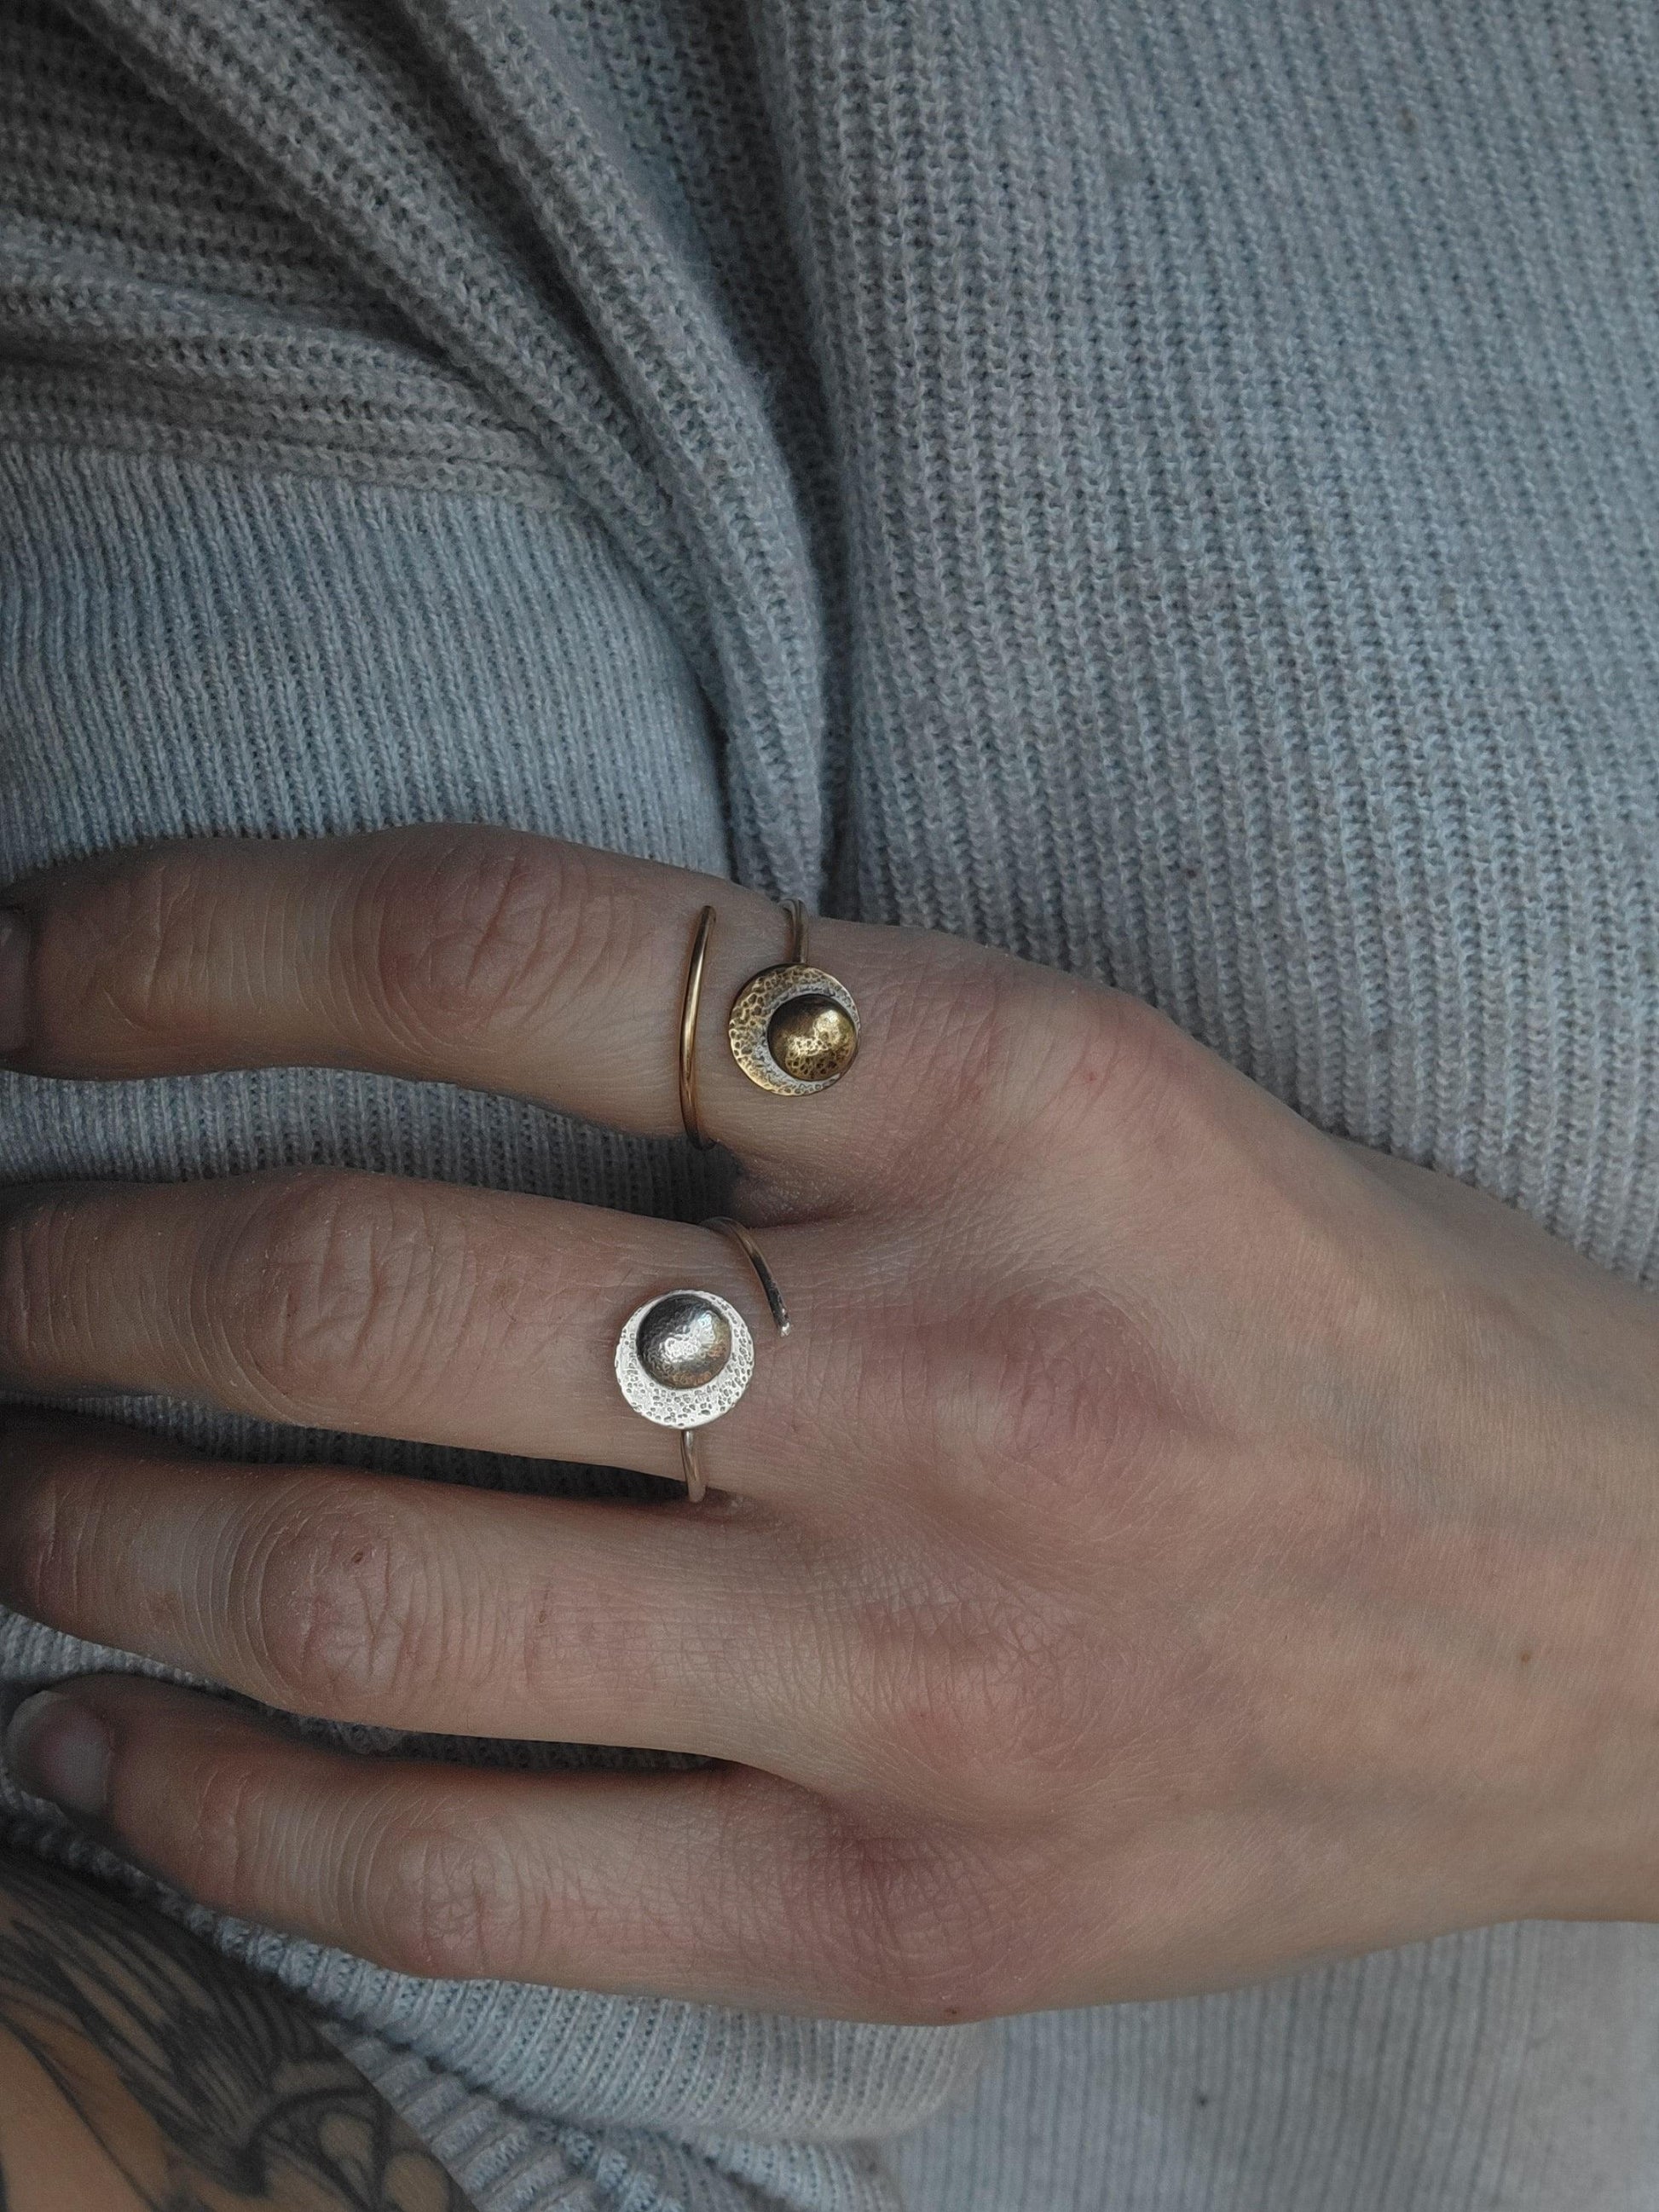 Adjustable Reflections Moon Ring for resilience and strength, shown in gold and sterling silver on a woman's hand.